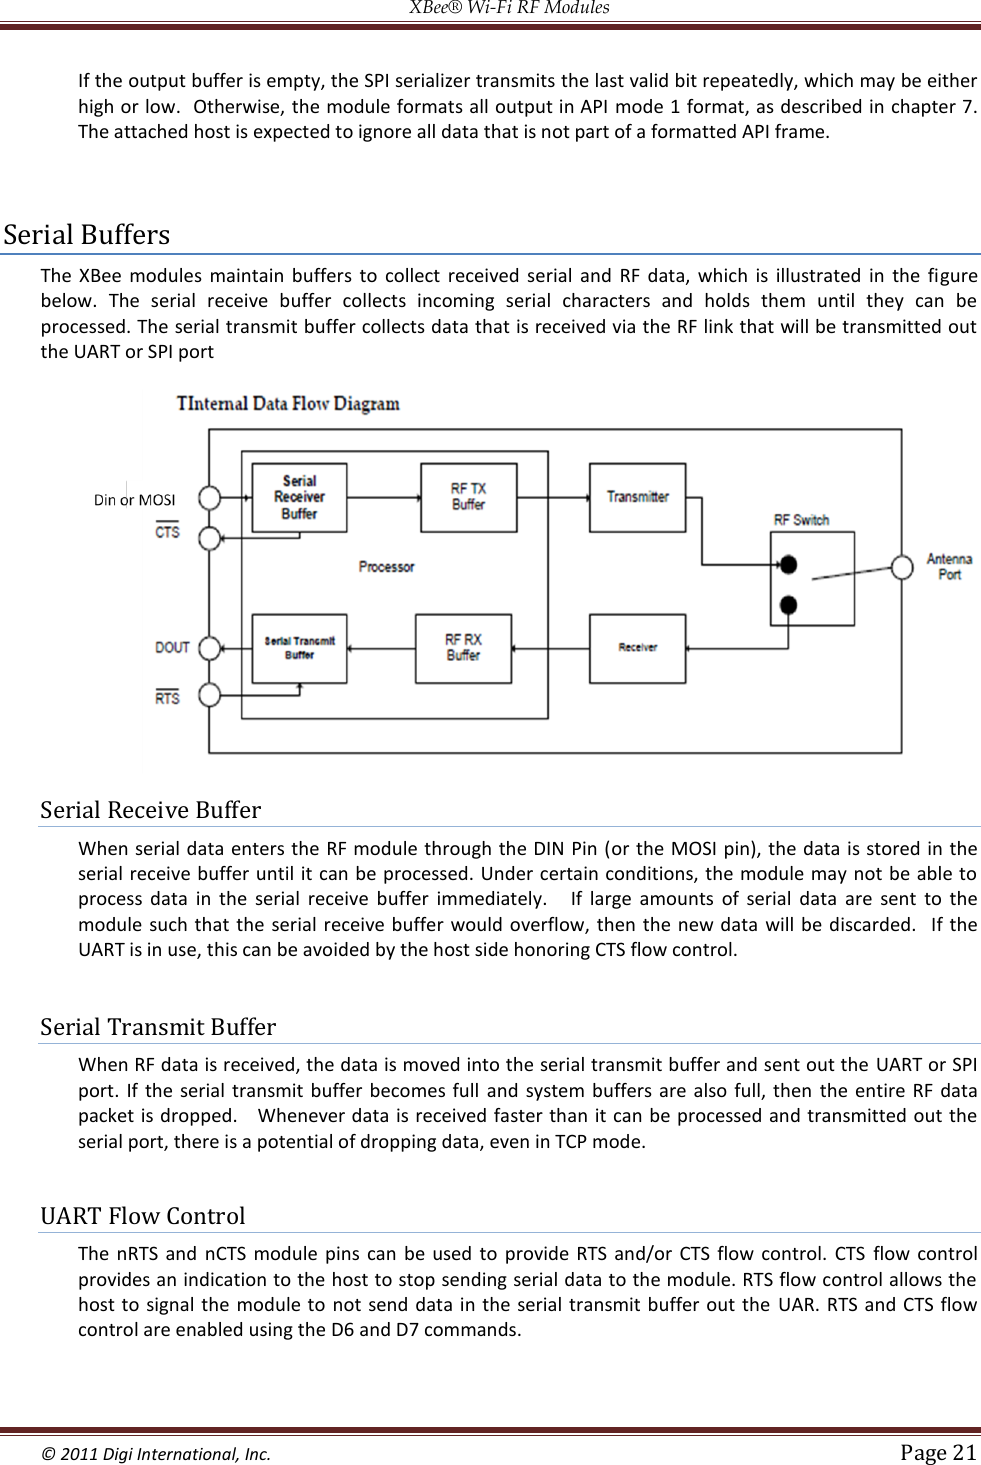 XBee® Wi-Fi RF Modules  © 2011 Digi International, Inc.   Page 21  If the output buffer is empty, the SPI serializer transmits the last valid bit repeatedly, which may be either high or low.  Otherwise, the module formats all output in API  mode 1 format, as described in chapter 7.  The attached host is expected to ignore all data that is not part of a formatted API frame.   Serial Buffers The  XBee  modules  maintain  buffers  to  collect  received  serial  and  RF  data,  which  is  illustrated  in  the  figure below.  The  serial  receive  buffer  collects  incoming  serial  characters  and  holds  them  until  they  can  be processed. The serial transmit buffer collects data that is received via the RF link that will be transmitted out the UART or SPI port    Serial Receive Buffer When serial data enters the RF module through the DIN Pin (or the MOSI  pin), the data is stored in the serial receive buffer until it can be processed. Under certain conditions, the module may not be able to process  data  in  the  serial  receive  buffer  immediately.    If  large  amounts  of  serial  data  are  sent  to  the module such  that  the  serial receive buffer would overflow, then the  new data  will  be discarded.    If  the UART is in use, this can be avoided by the host side honoring CTS flow control.  Serial Transmit Buffer When RF data is received, the data is moved into the serial transmit buffer and sent out the  UART or SPI port.  If  the  serial transmit buffer becomes  full  and system buffers are  also  full,  then  the  entire  RF data packet is dropped.    Whenever data is received faster than it can be processed and transmitted out the serial port, there is a potential of dropping data, even in TCP mode.  UART Flow Control The  nRTS  and  nCTS  module  pins  can  be used  to  provide  RTS  and/or  CTS  flow  control.  CTS  flow  control provides an indication to the host to stop sending serial data to the module. RTS flow control allows the host to  signal the module to  not  send data in the  serial transmit buffer  out  the  UAR.  RTS and CTS flow control are enabled using the D6 and D7 commands.  